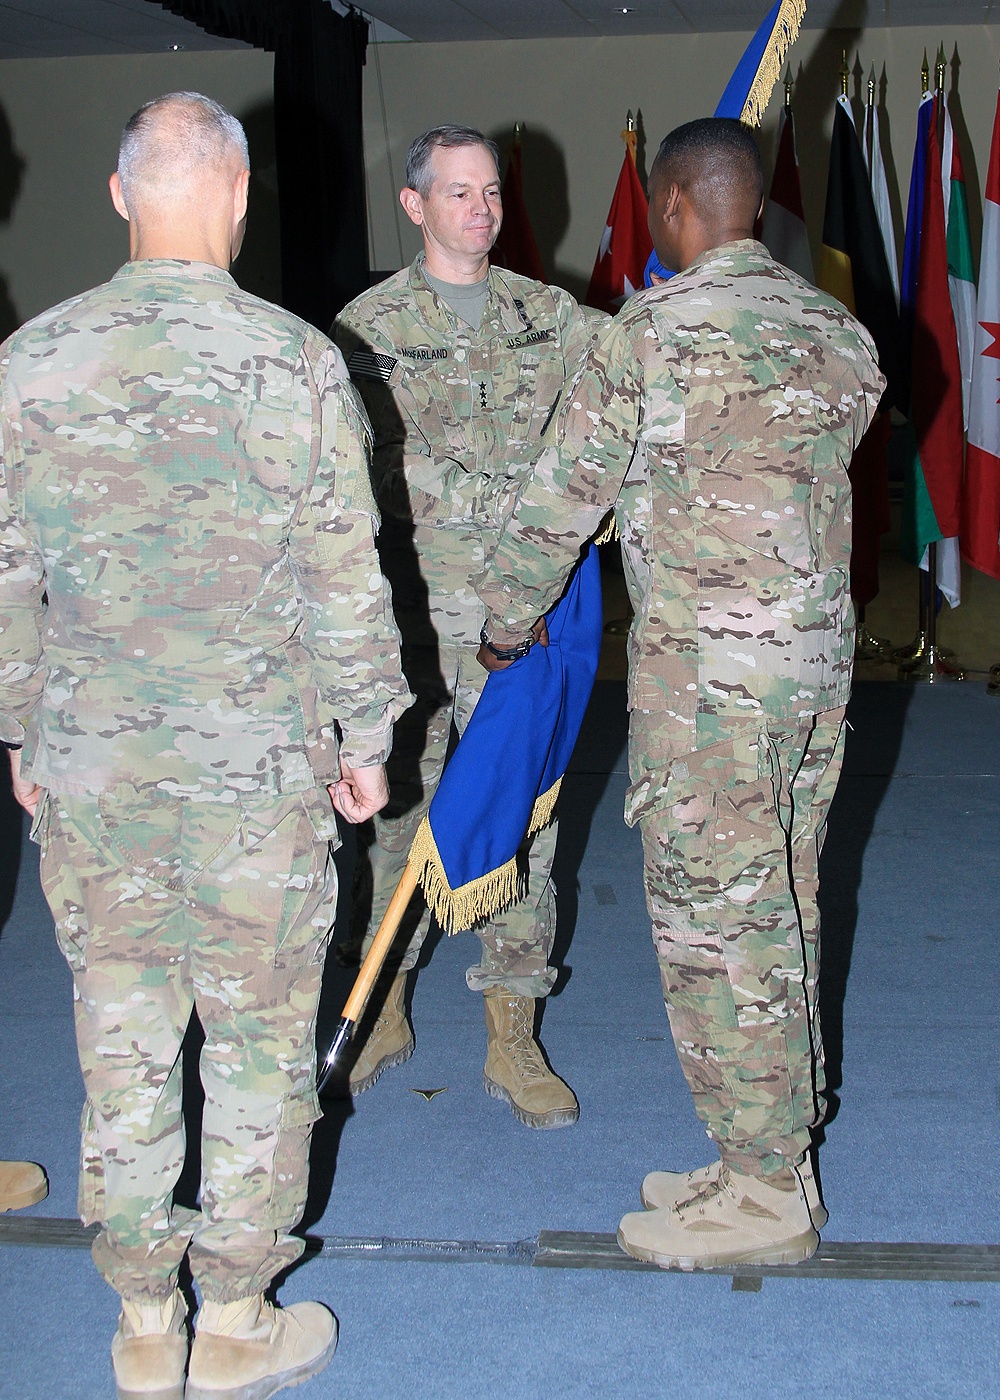 III Corps assumes Operation Inherent Resolve mission